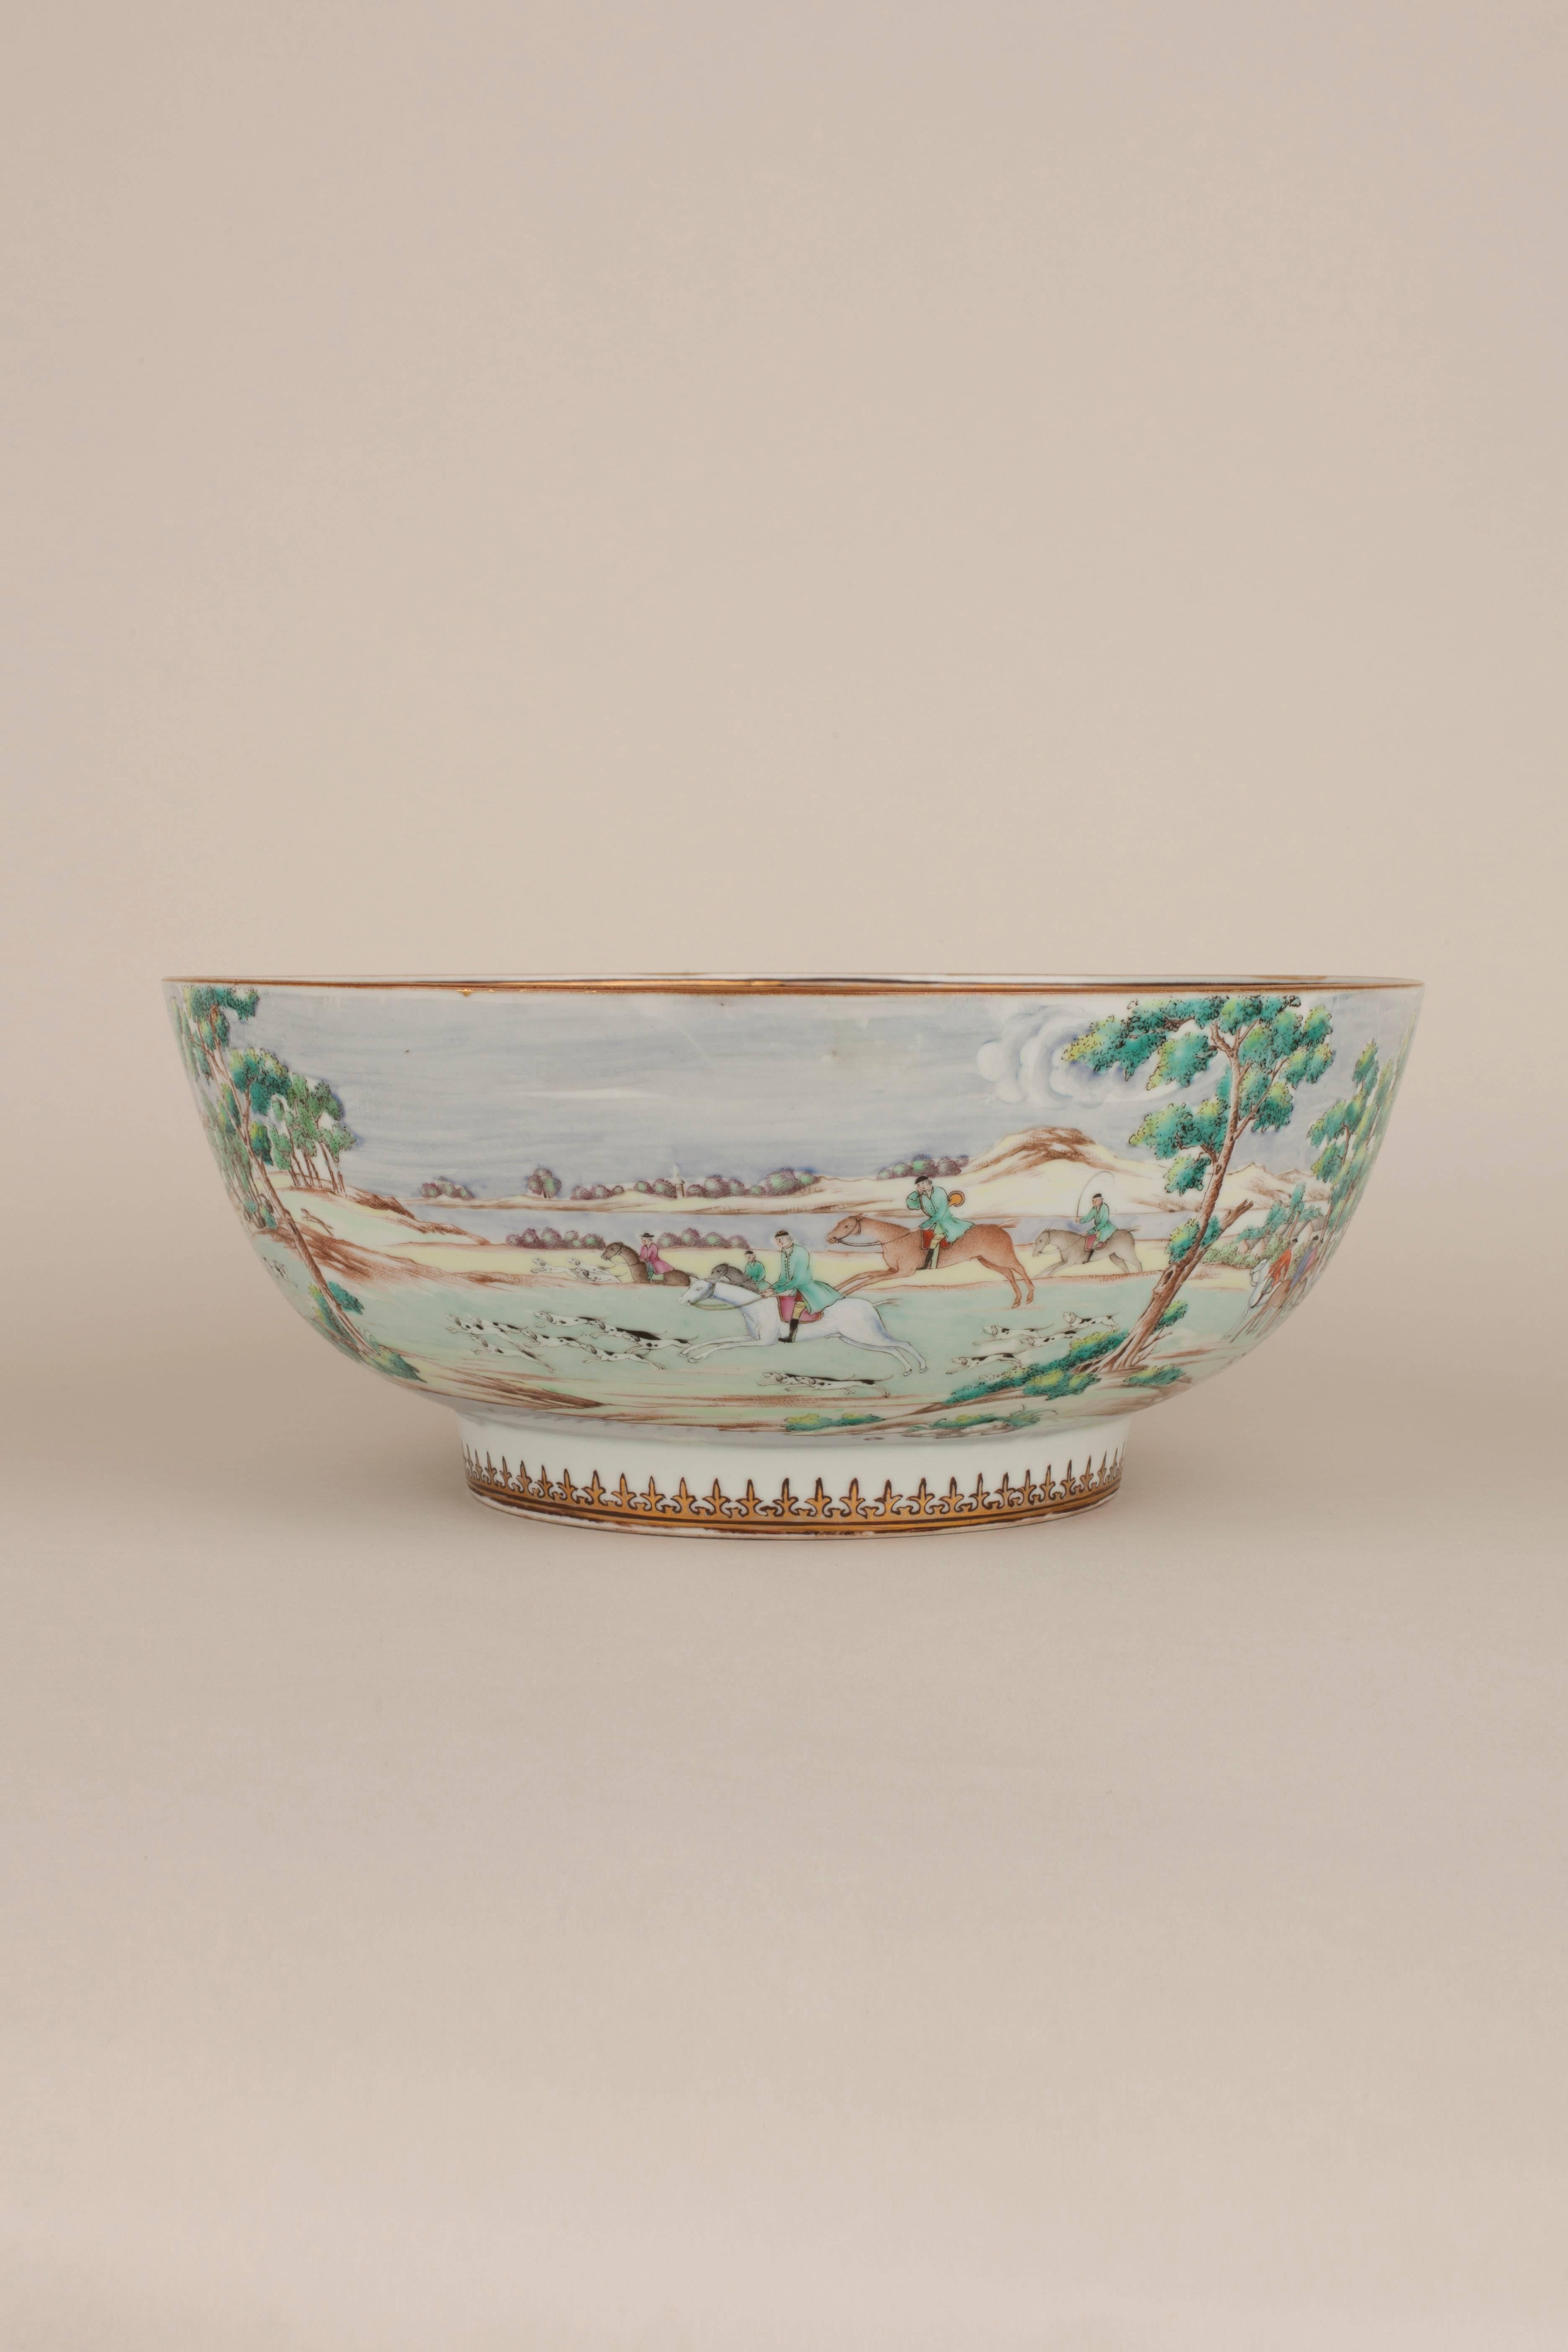 A Chinese porcelain famille rose English market hunting bowl, finely painted on the exterior after an original print by James Seymour, with a continuous scene of twenty-six equestrian riders with numerous dogs in a fox-hunt amongst buildings in a